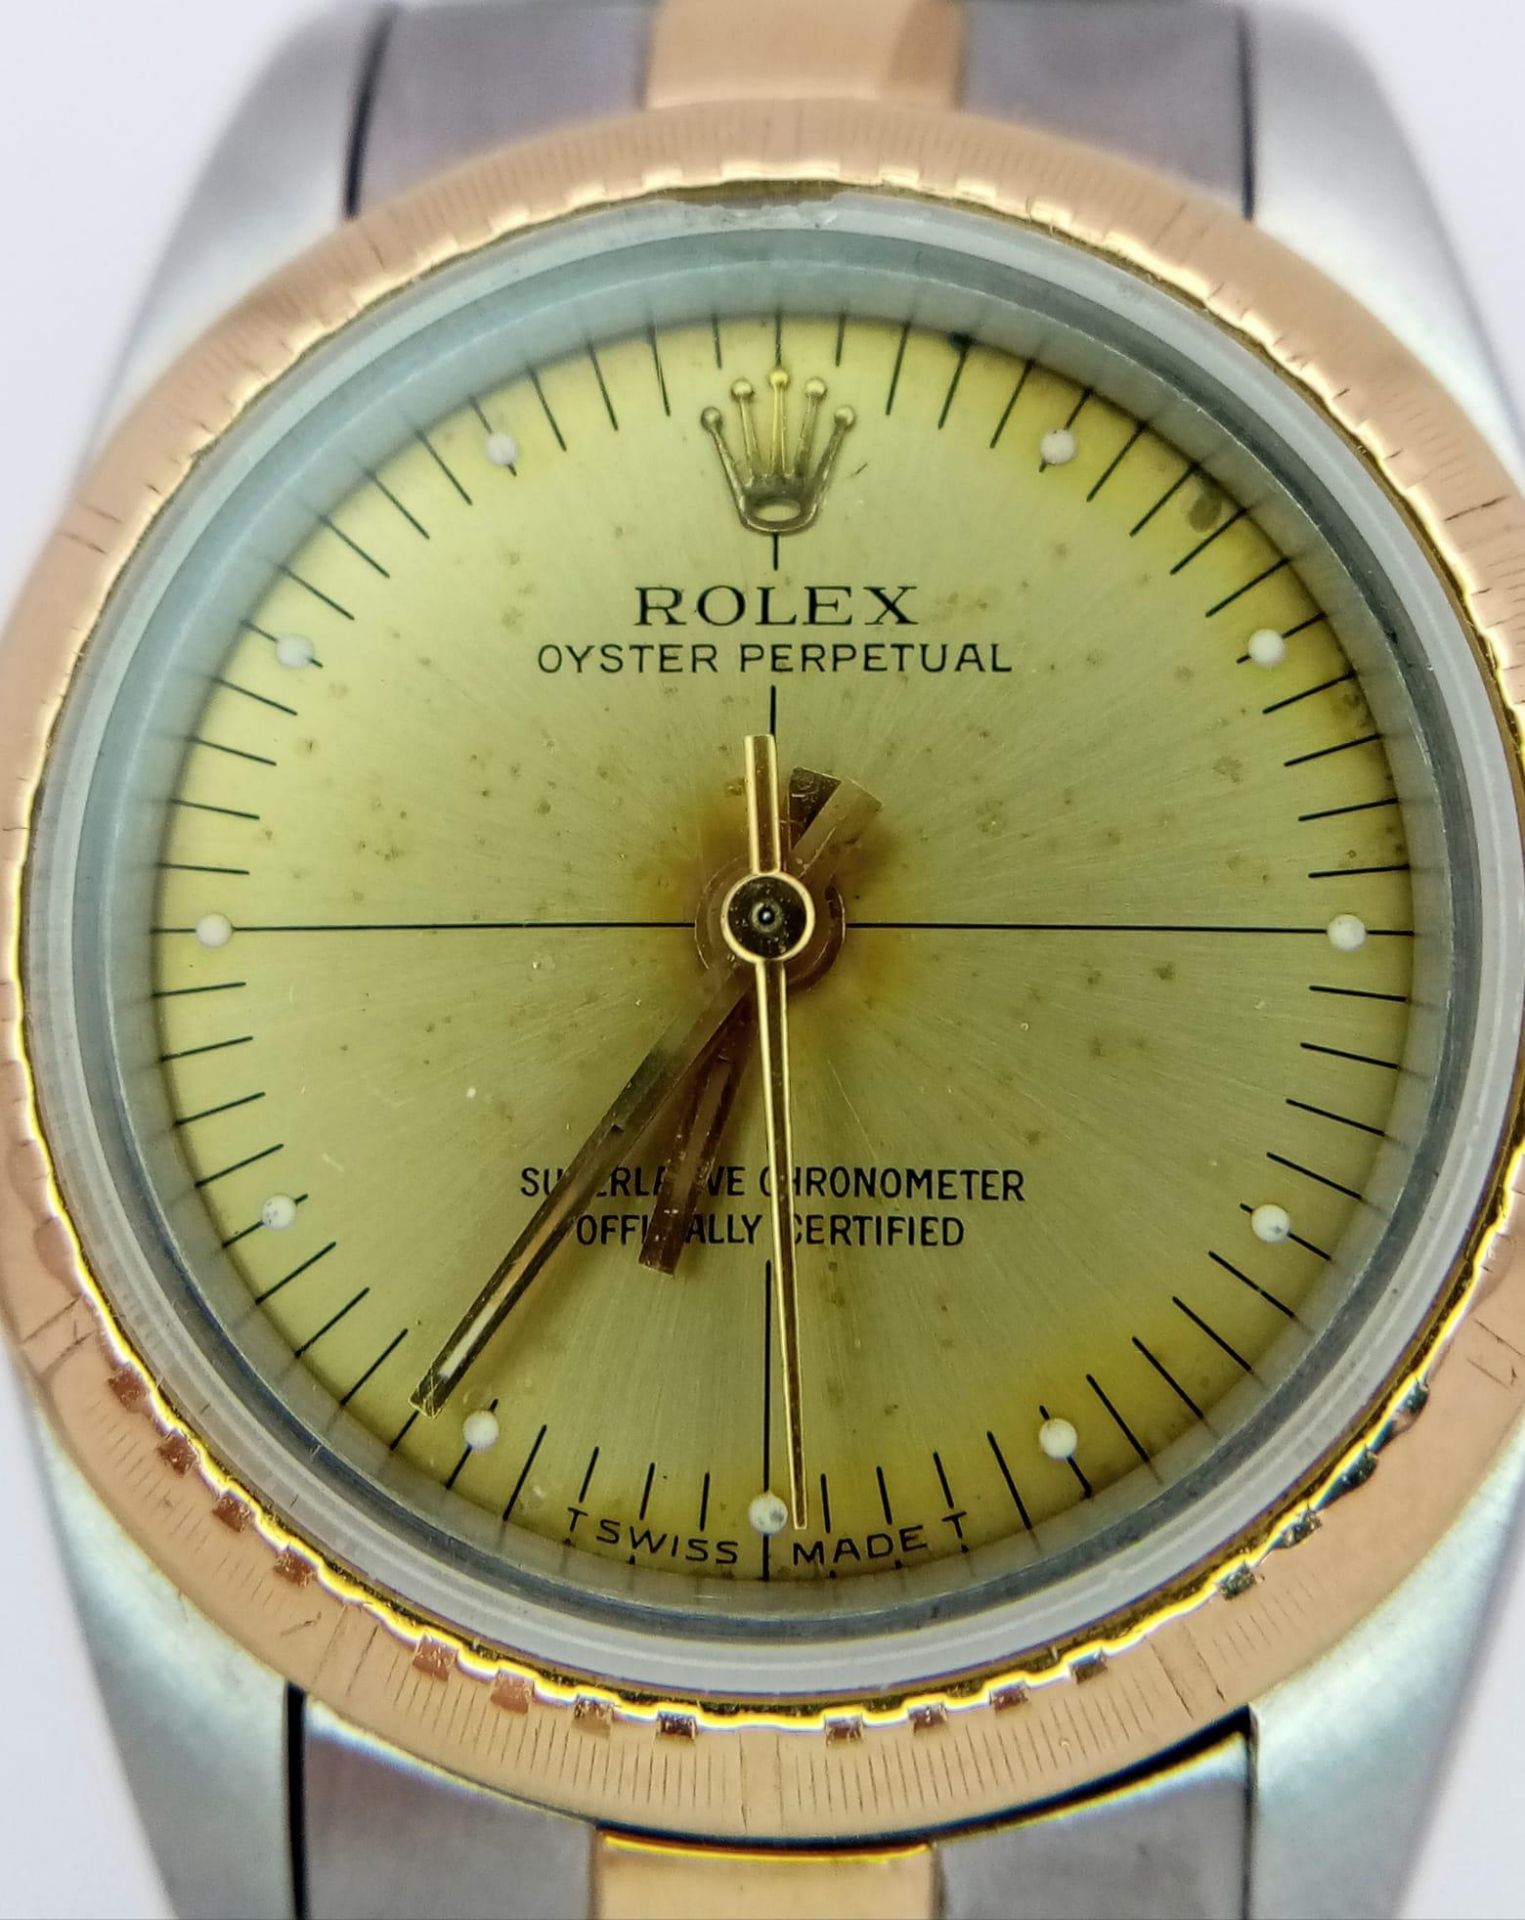 A ROLEX LADIES BI-METAL AUTOMATIC WATCH WITH GOLDTONE DIAL , LATEST STYLE STRAP AND ORIGINAL ROLEX - Image 4 of 8